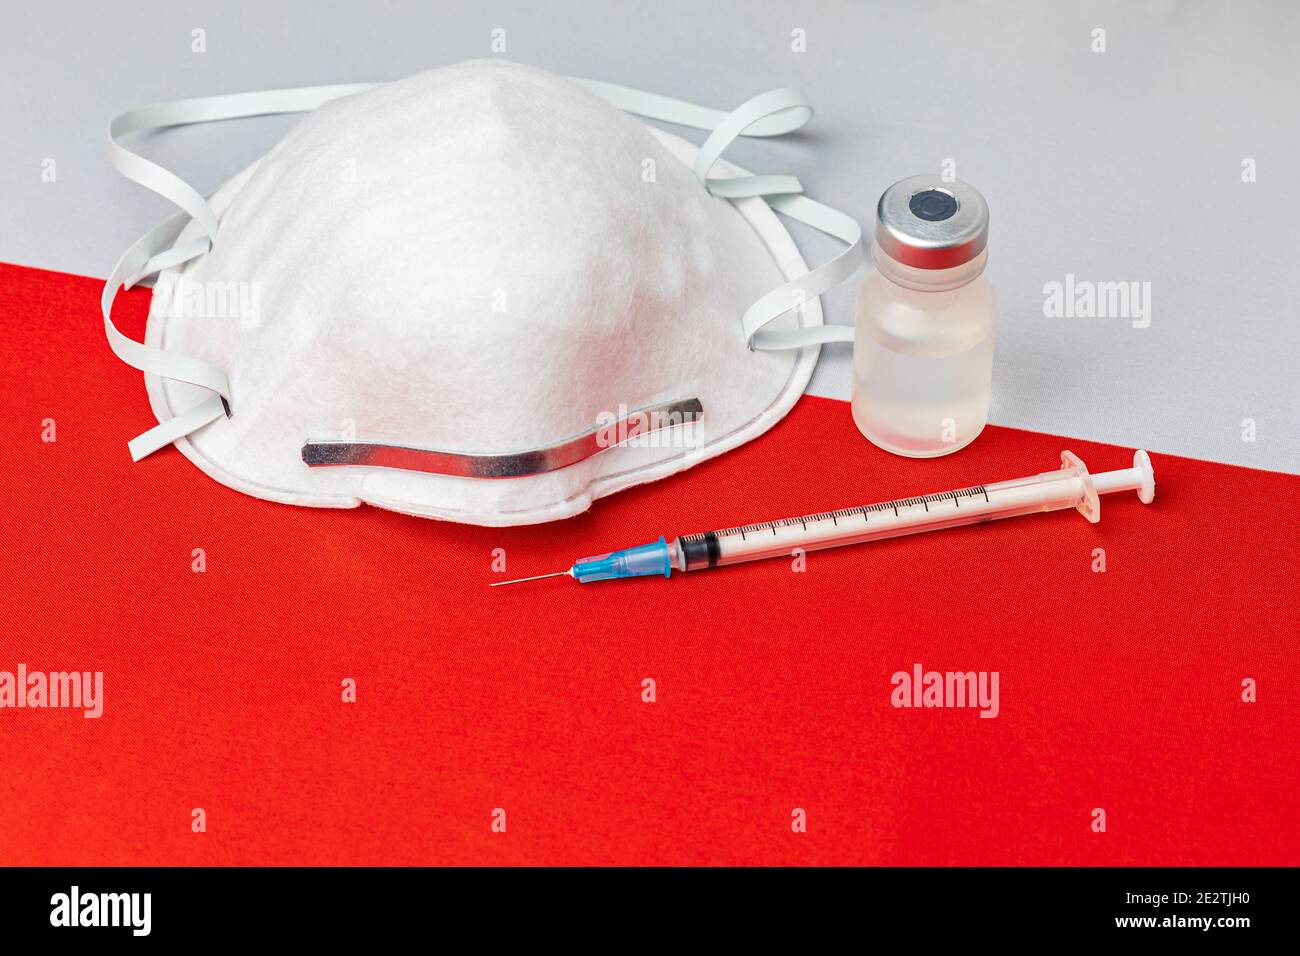 Poland flag, n95 face mask, needle syringe and vial. Concept of Covid-19 coronavirus vaccine distribution, supply shortage and healthcare crisis Stock Photo